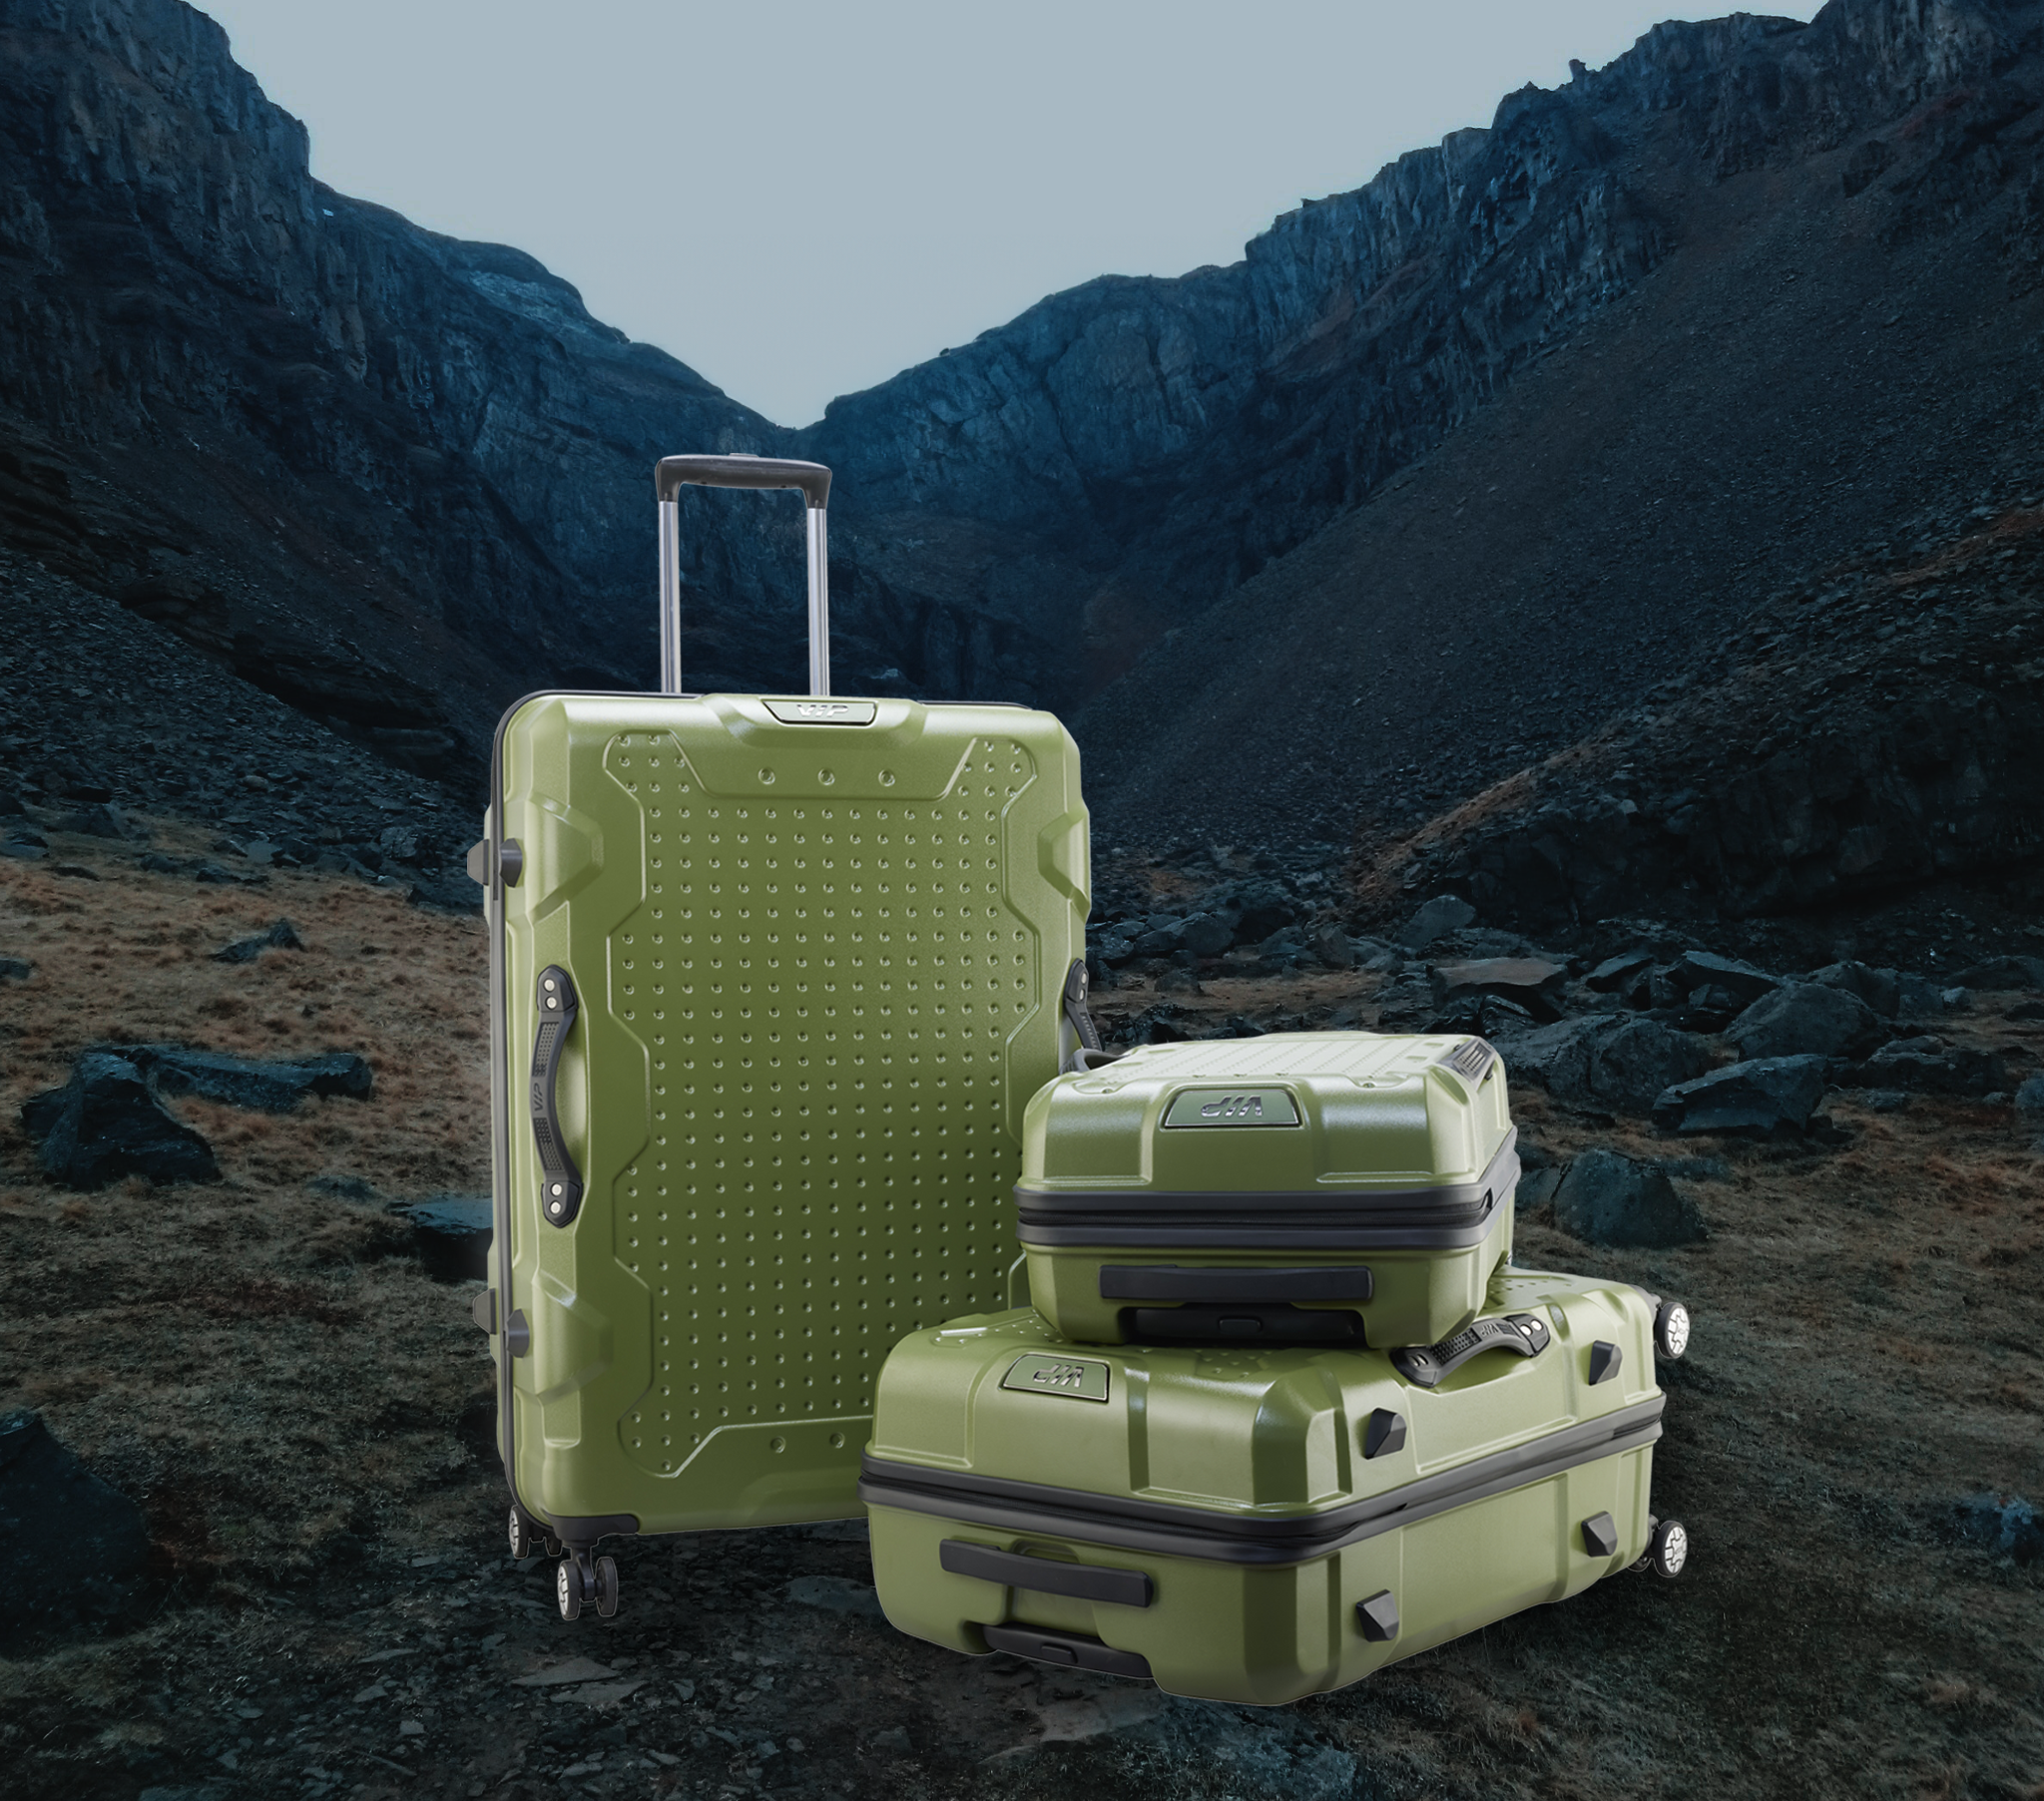 Trolley Bags, Backpacks, and Luggage Online at American Tourister